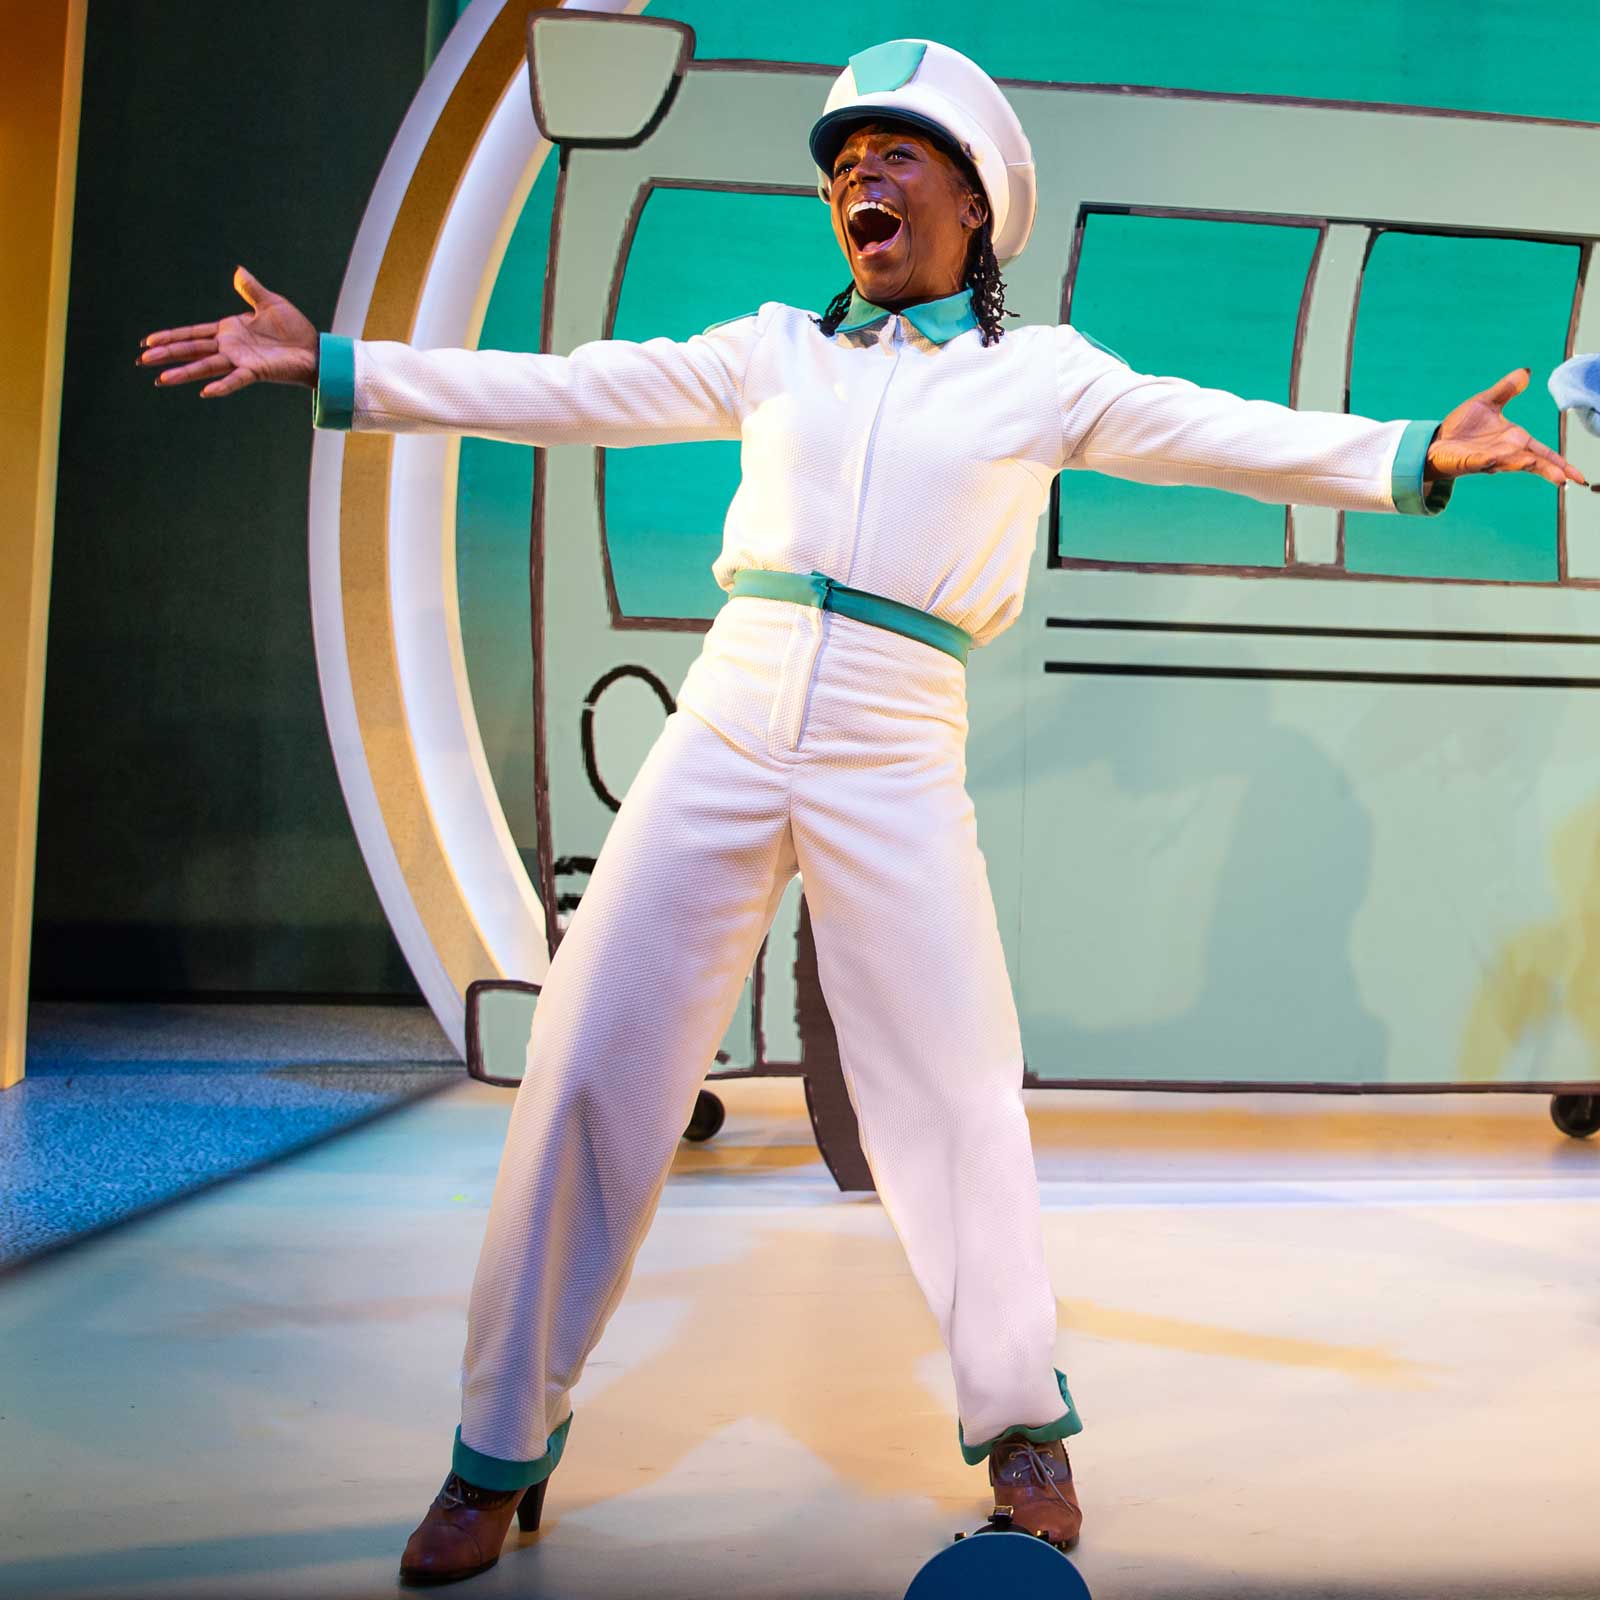 A production of Don't Let the Pigeon Drive the Bus at the John F. Kennedy Center for the Performing Arts.